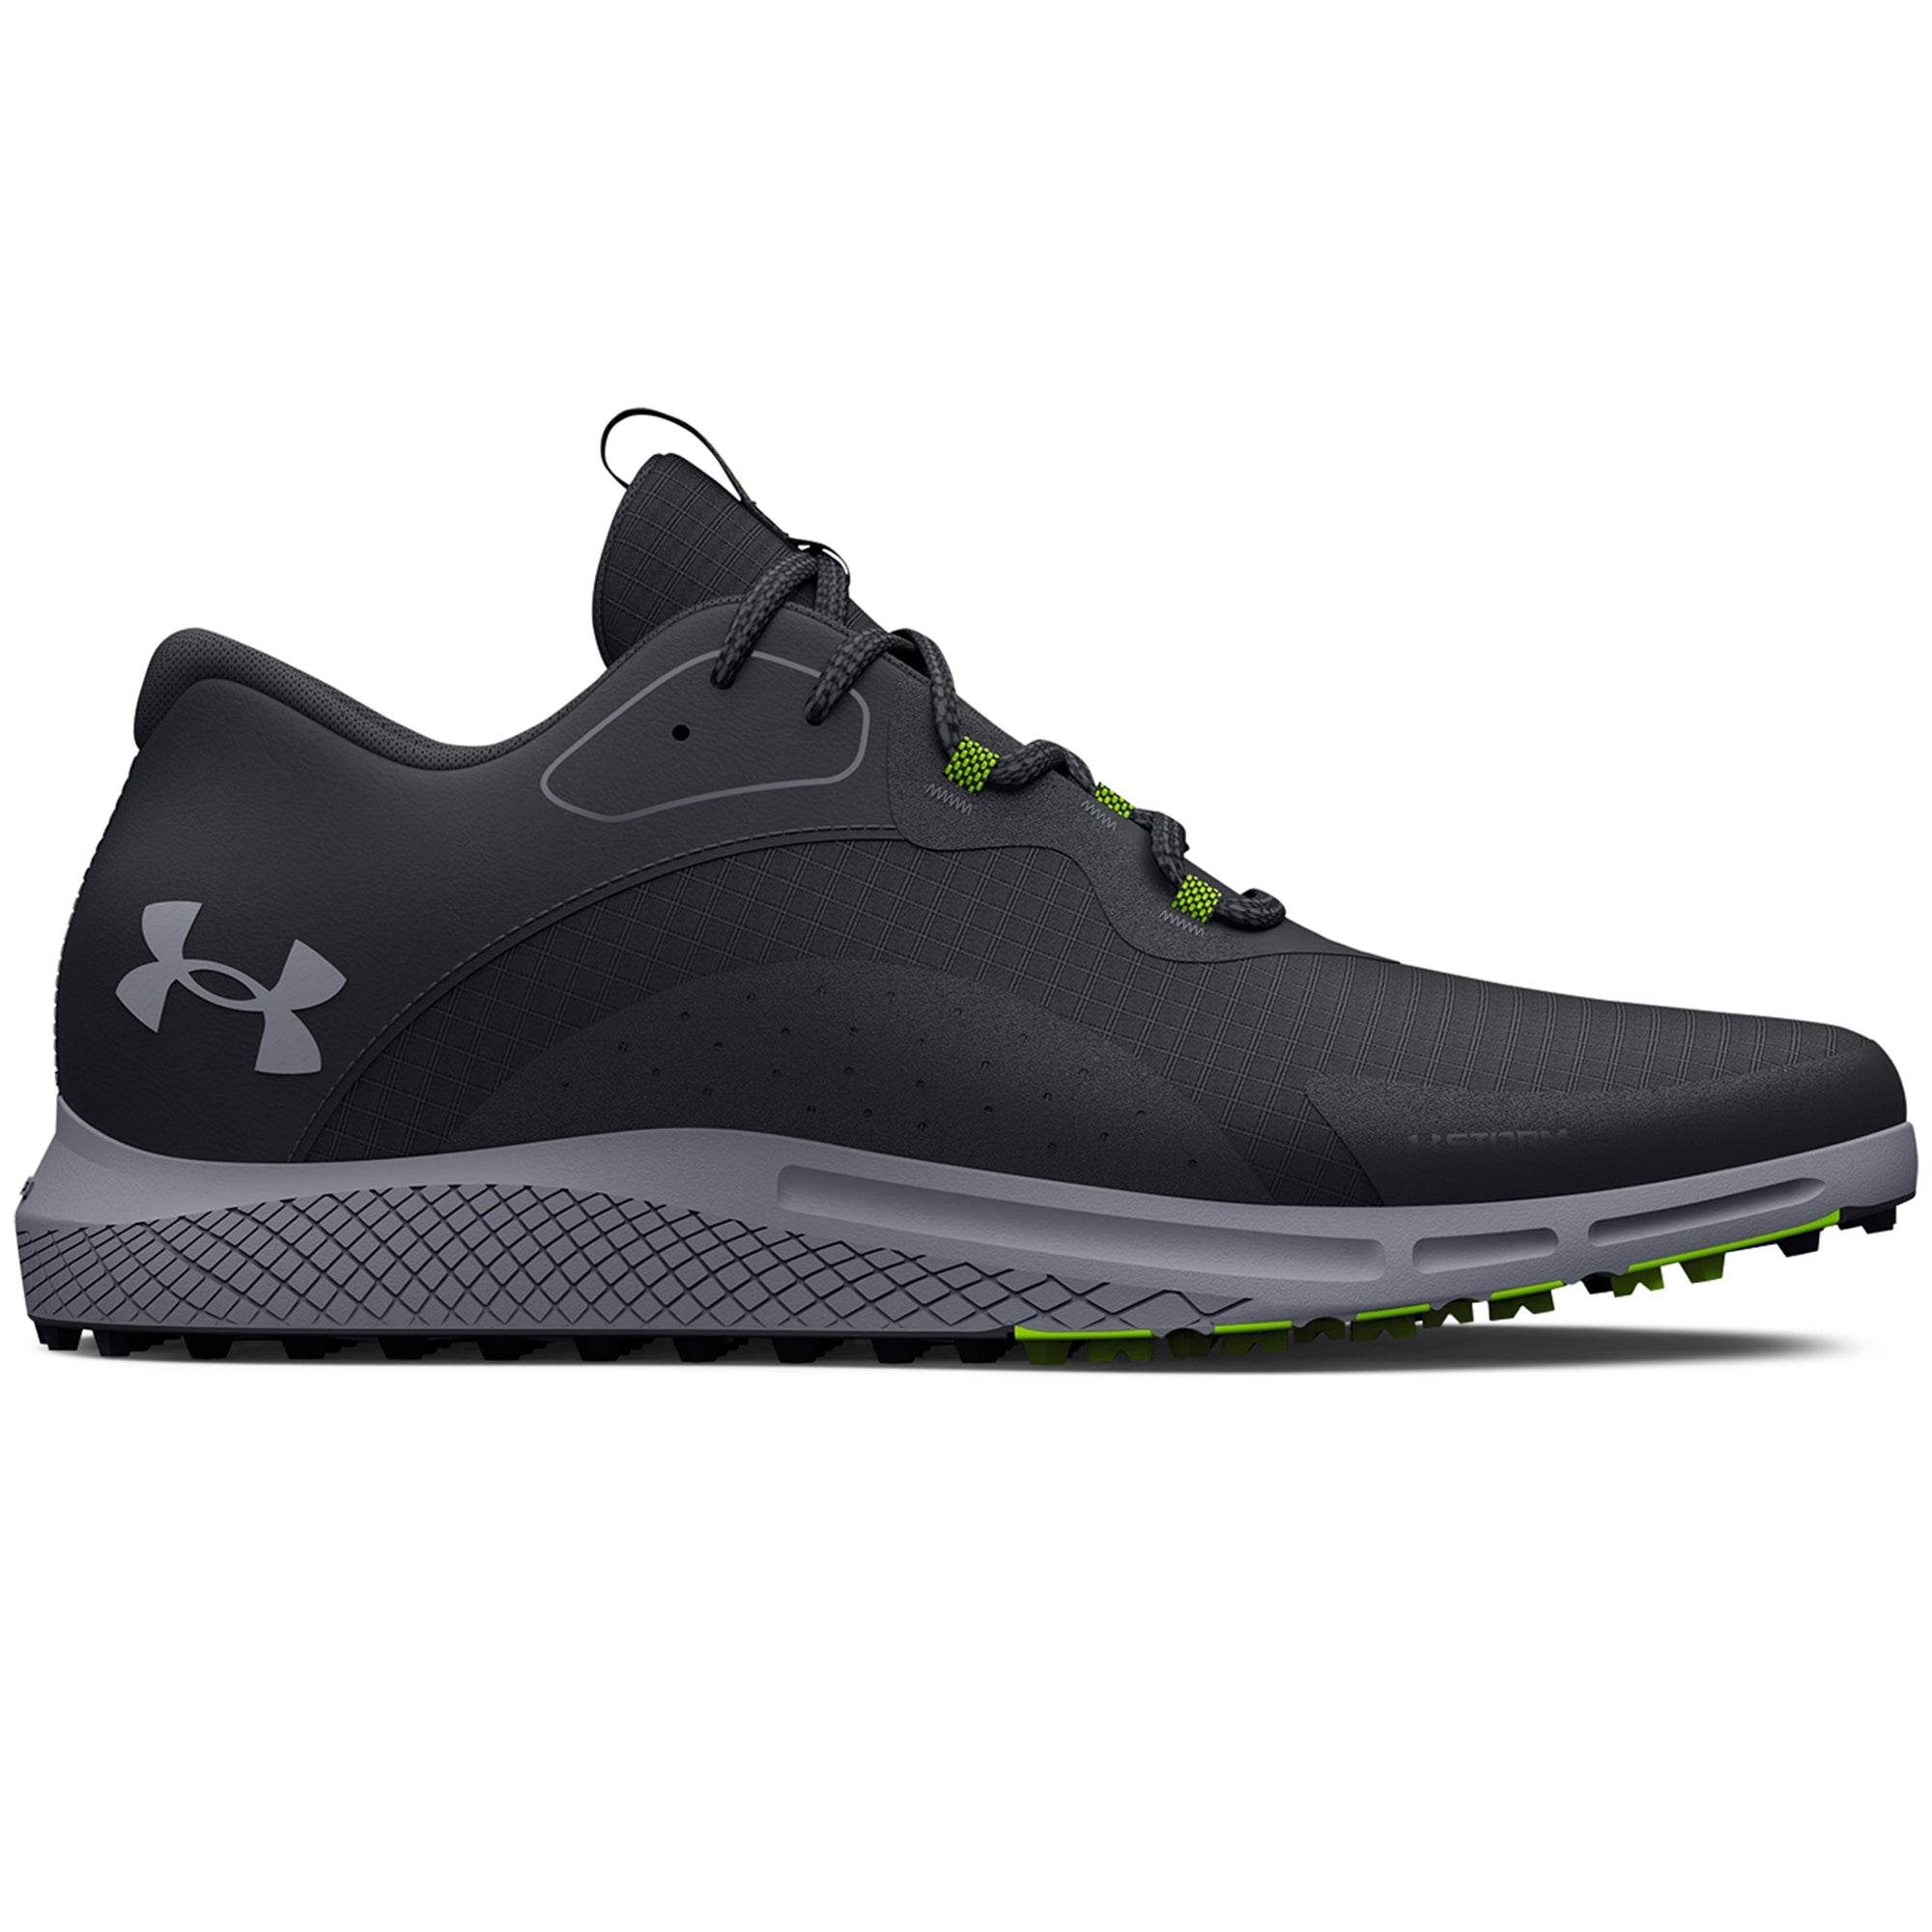 copy-of-under-armour-charged-draw-2-sl-golf-shoes-3026399-black-001